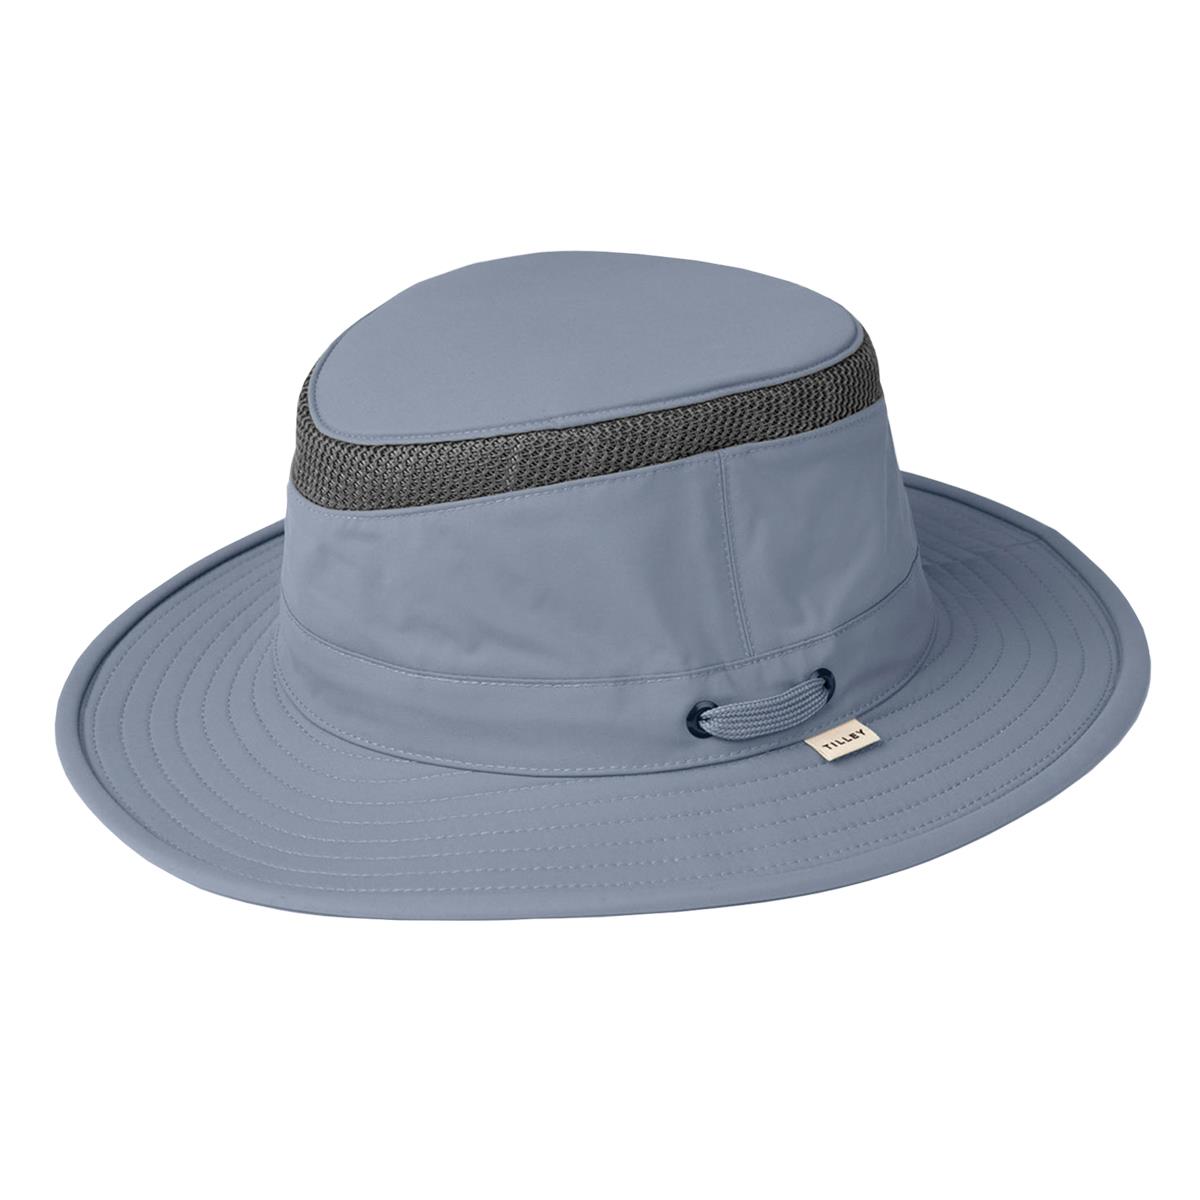 What are the style differences between the Tilley LTM5 and LTM6 hats?